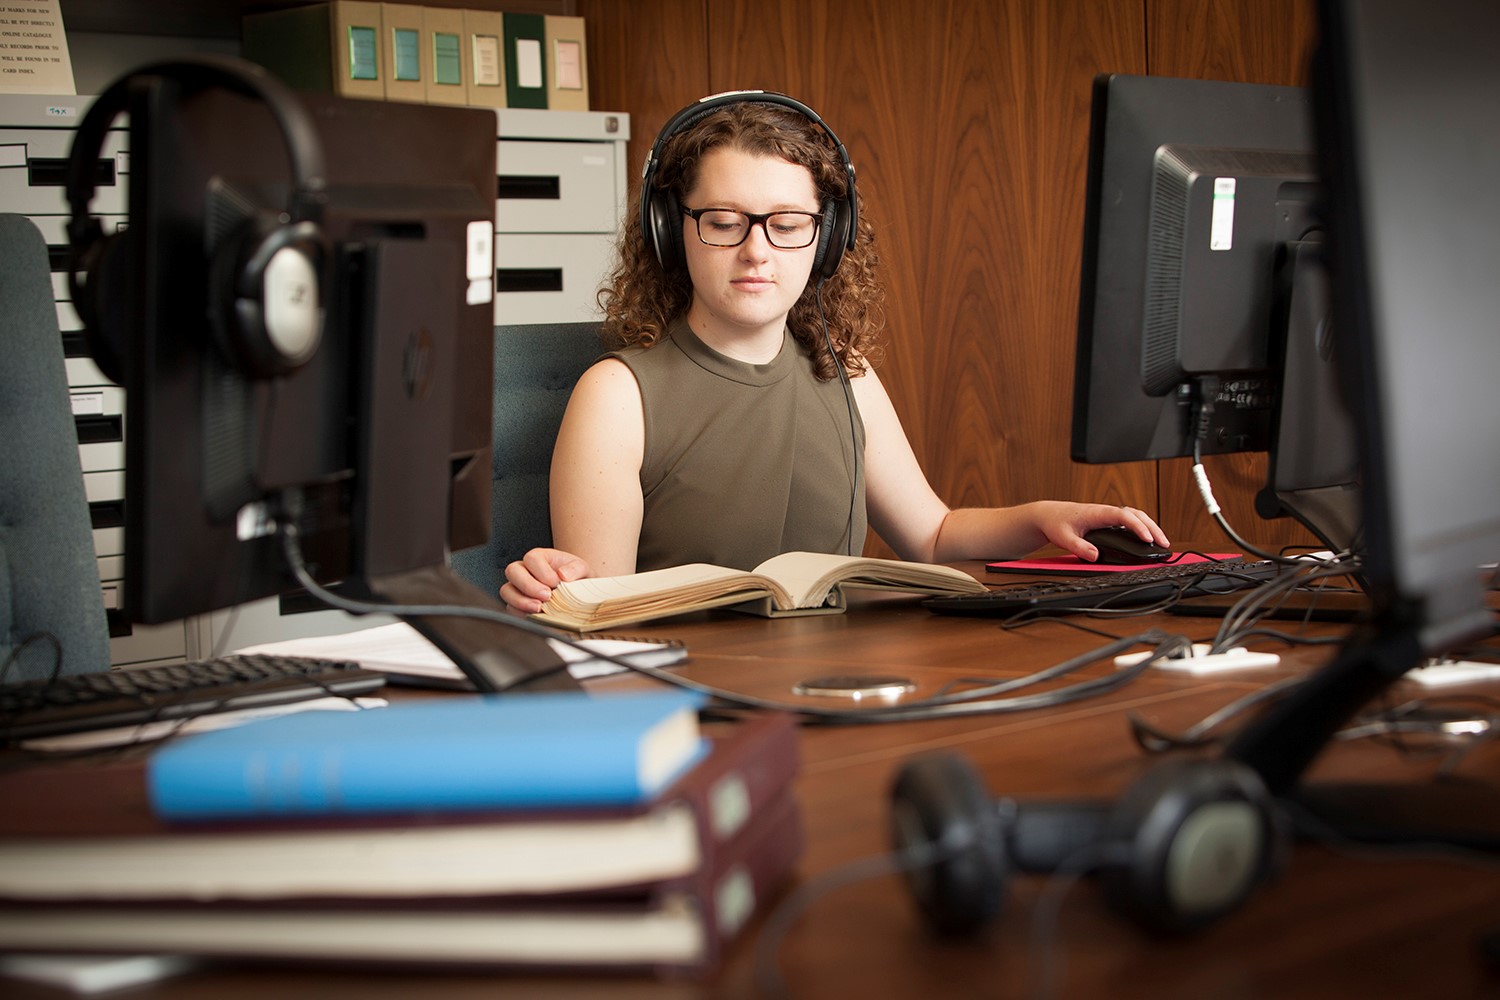 A woman at a desk with headphones on sat at a desk with a computer and book